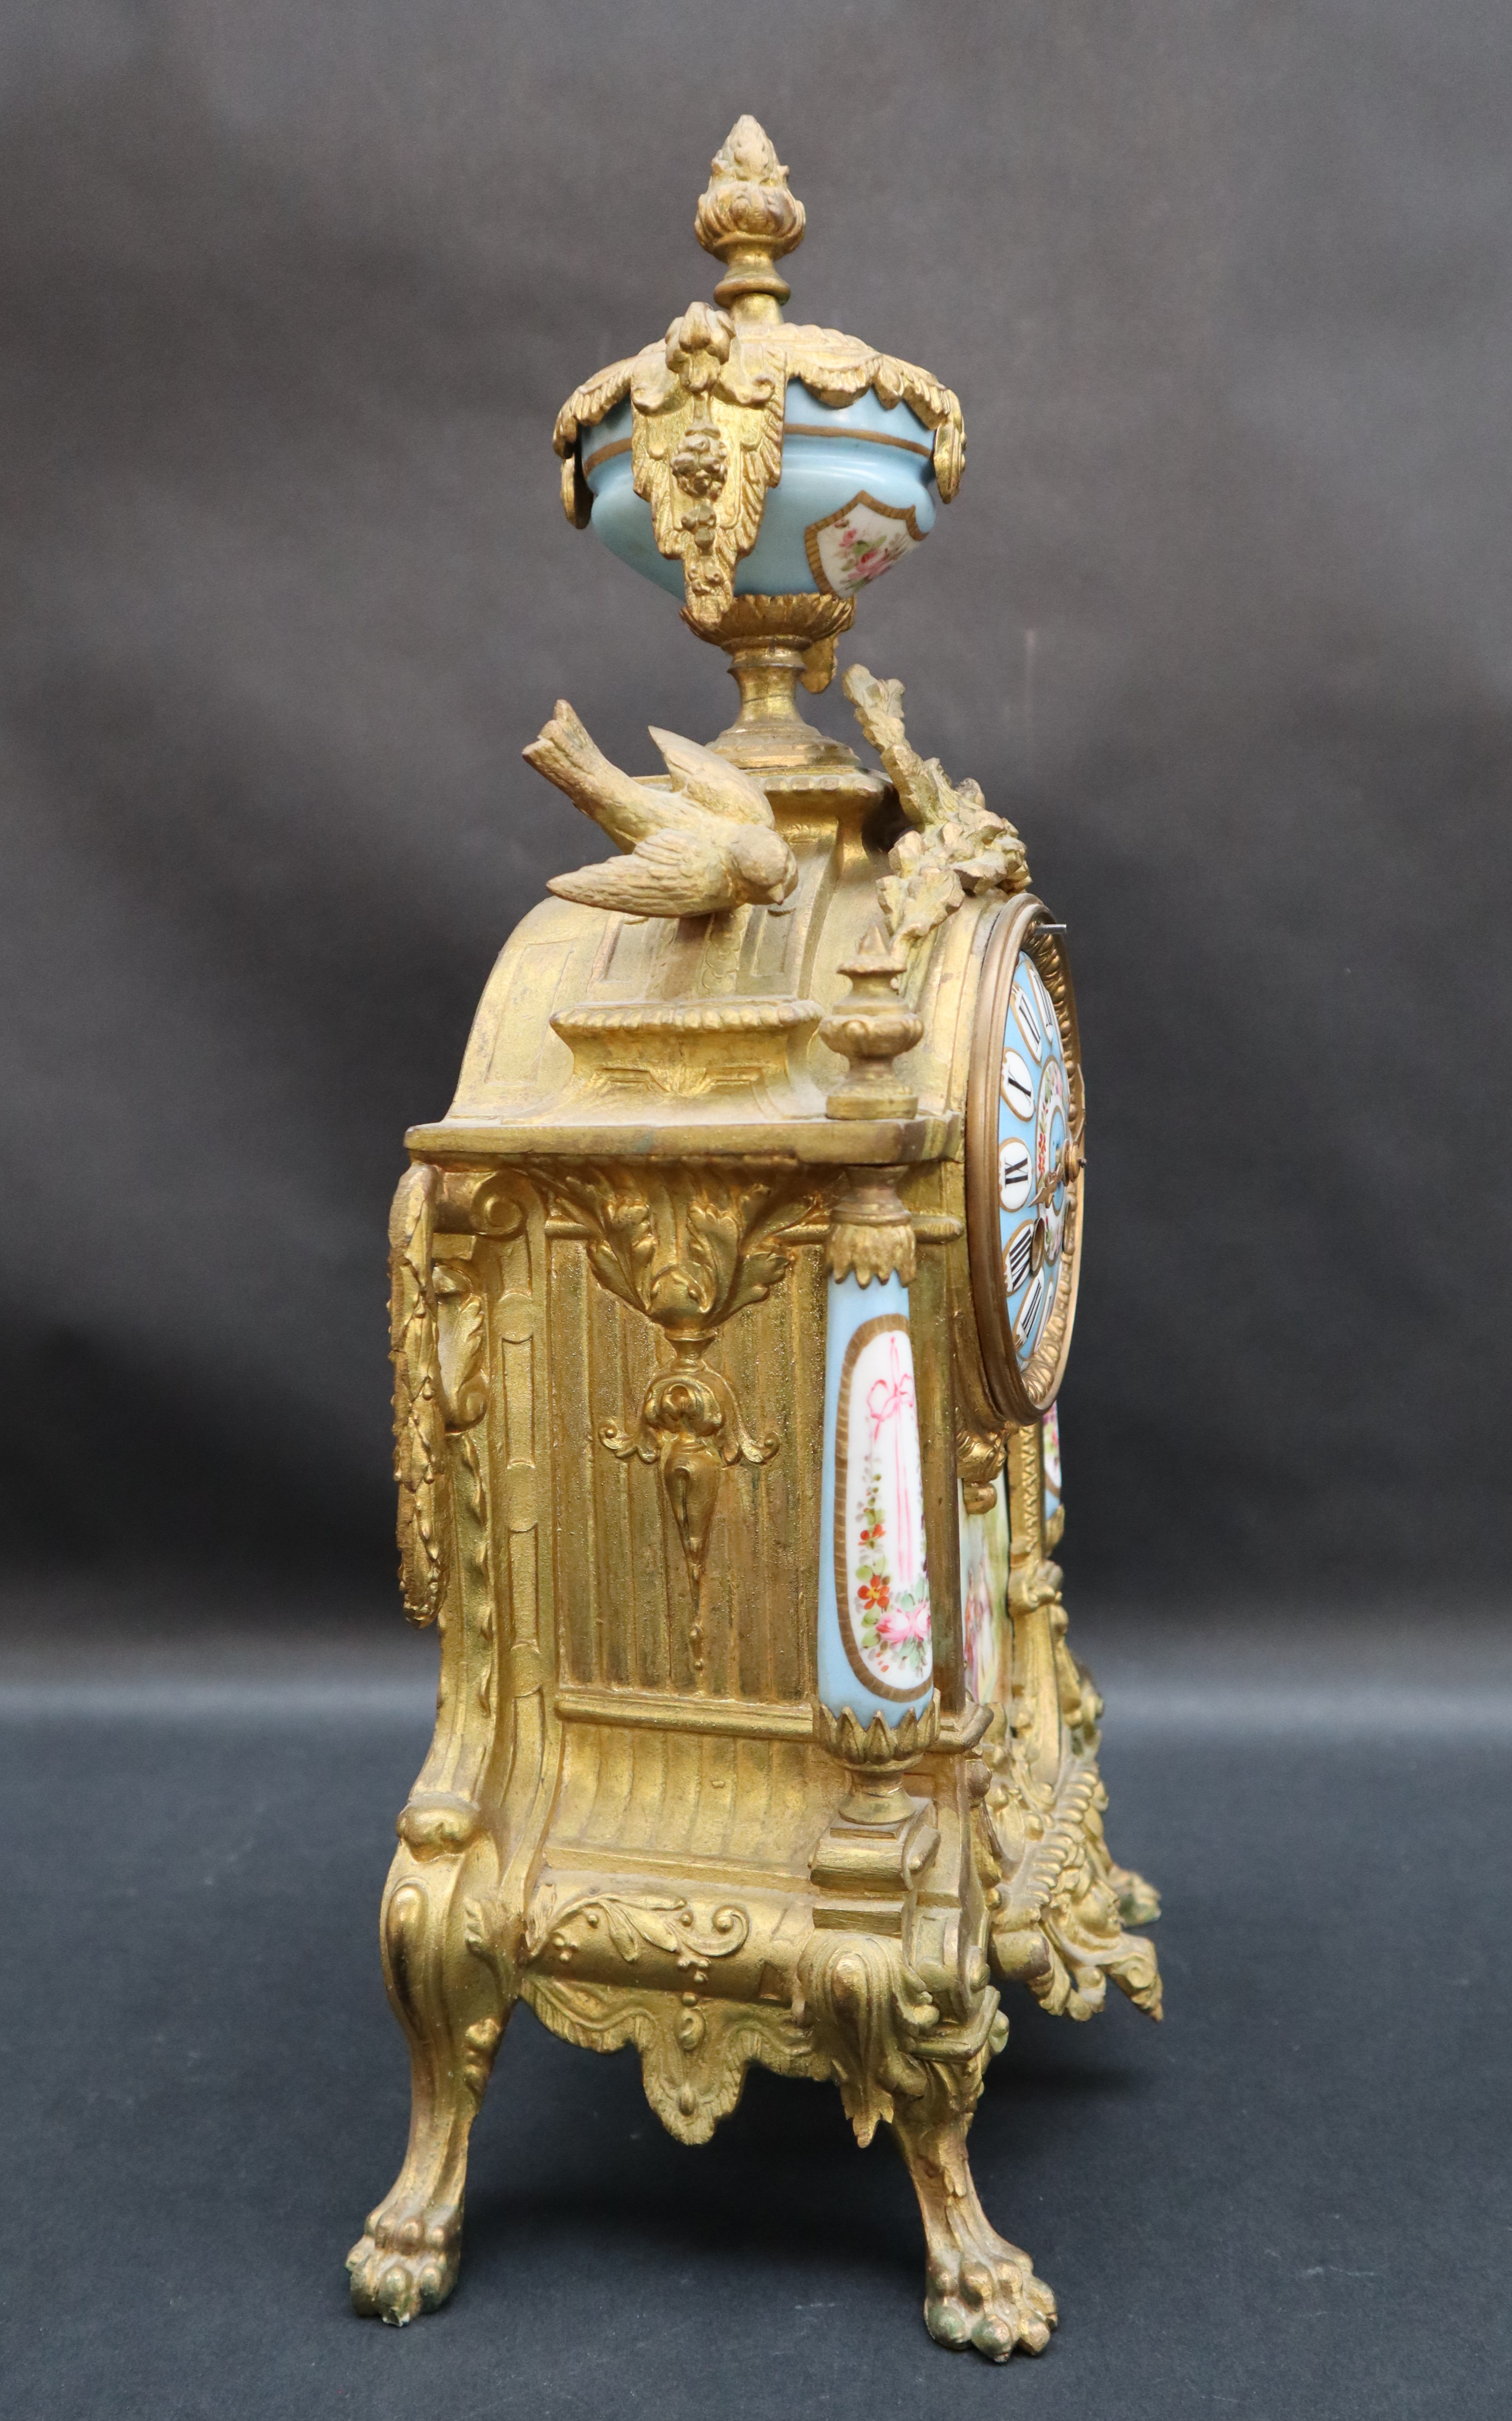 A 19th century French ormolu clock with a porcelain urn surmount, - Image 5 of 5